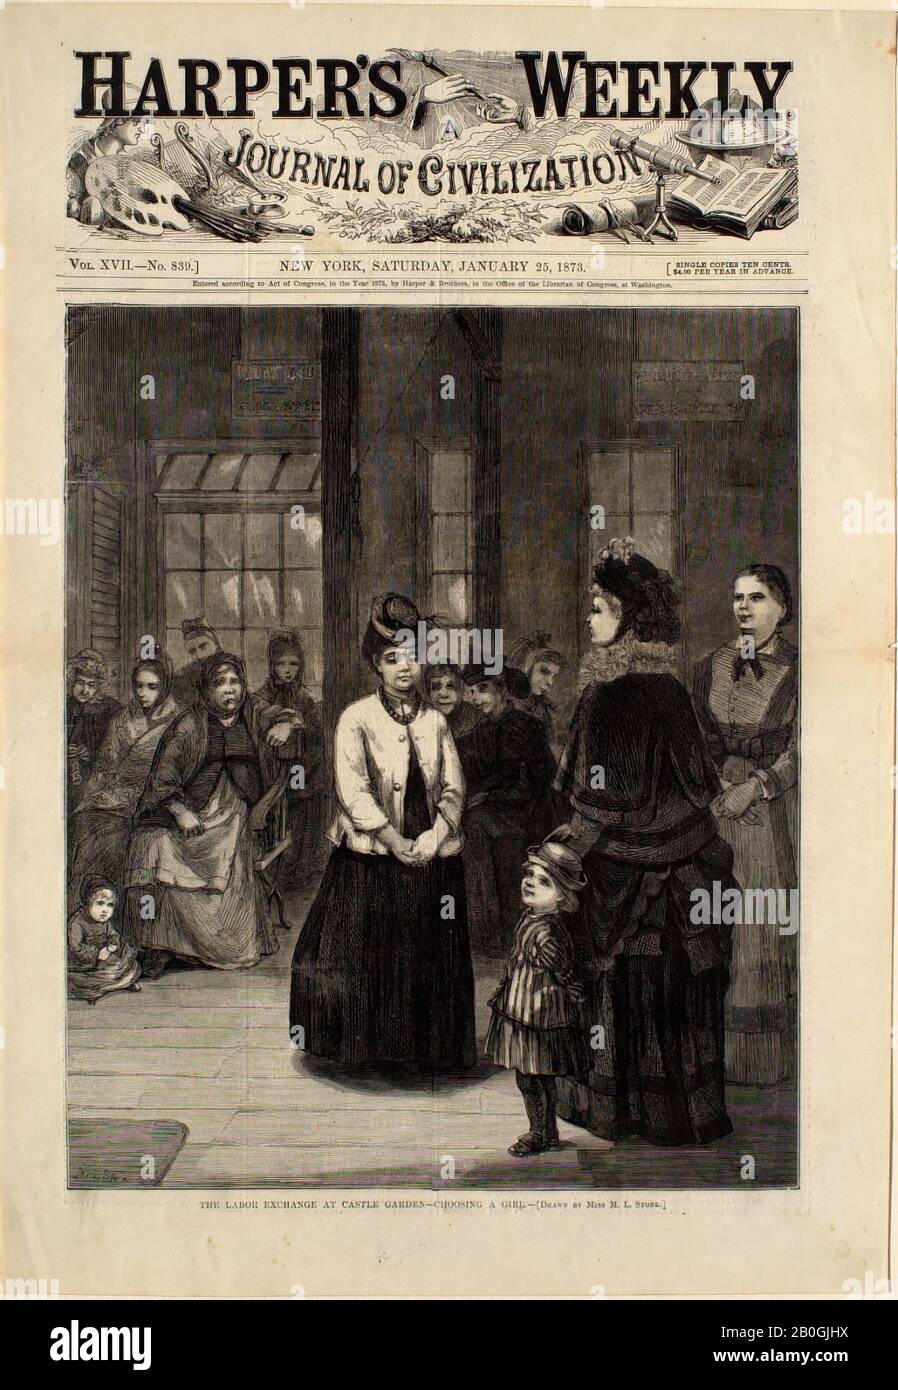 Margaret L. Stone, American, active 19th century, The Labor Exchange at Castle Garden—Choosing a Girl, 1873, Wood engraving on paper, image: 11 x 9 1/8 in. (27.9 x 23.1 cm Stock Photo